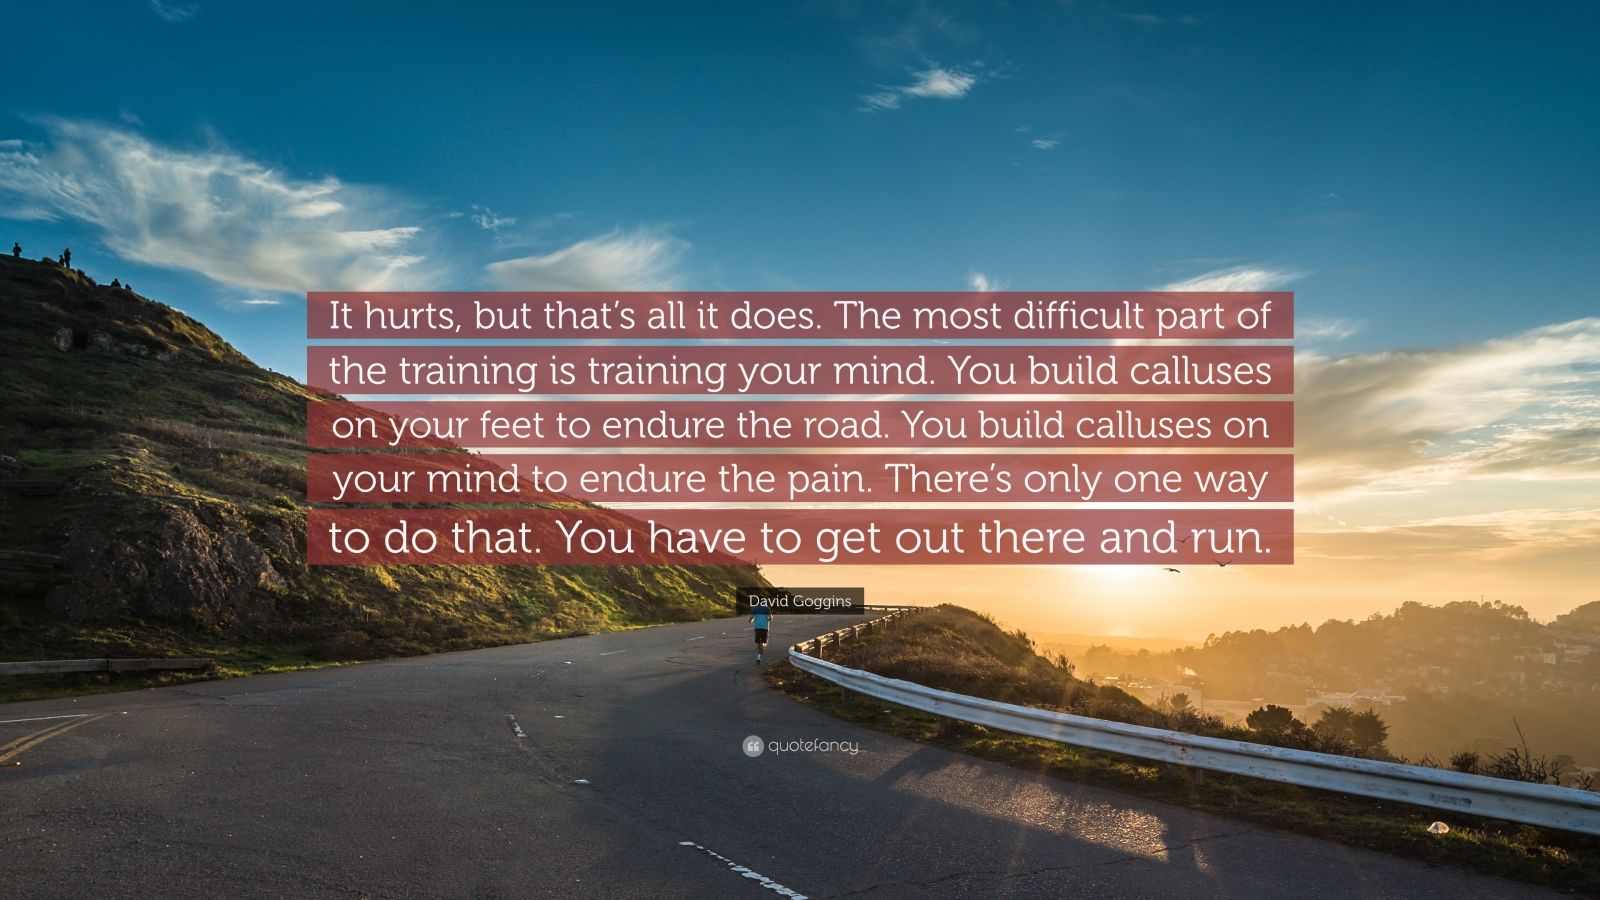 David Goggins Quote: “It hurts, but that’s all it does. The most ...